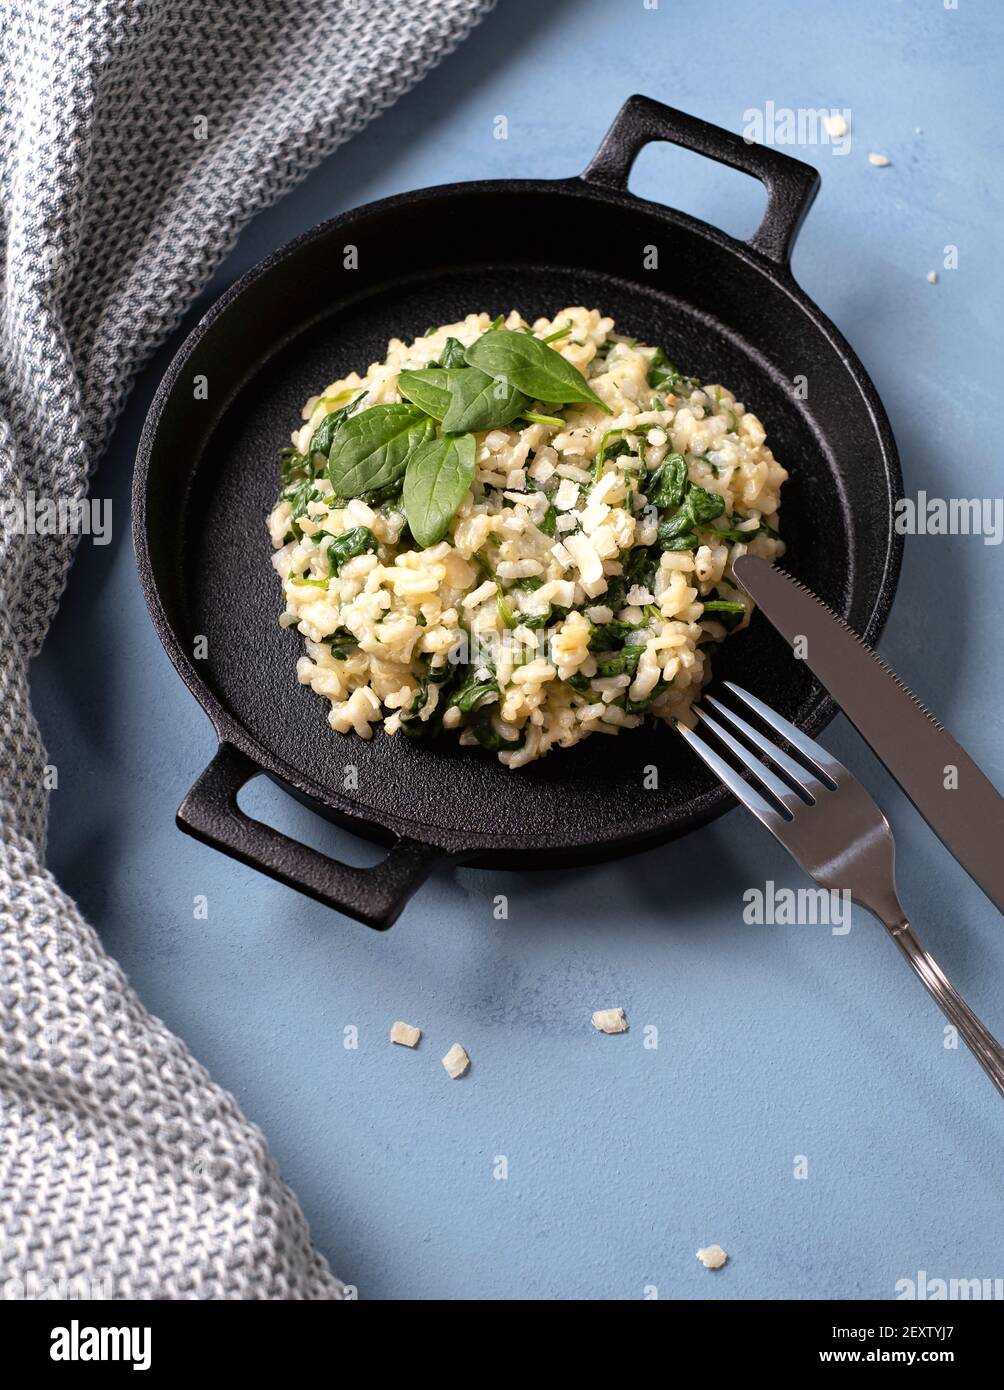 Risotto with young spinach leaves arranged in a cast iron black pan with knife and fork Stock Photo